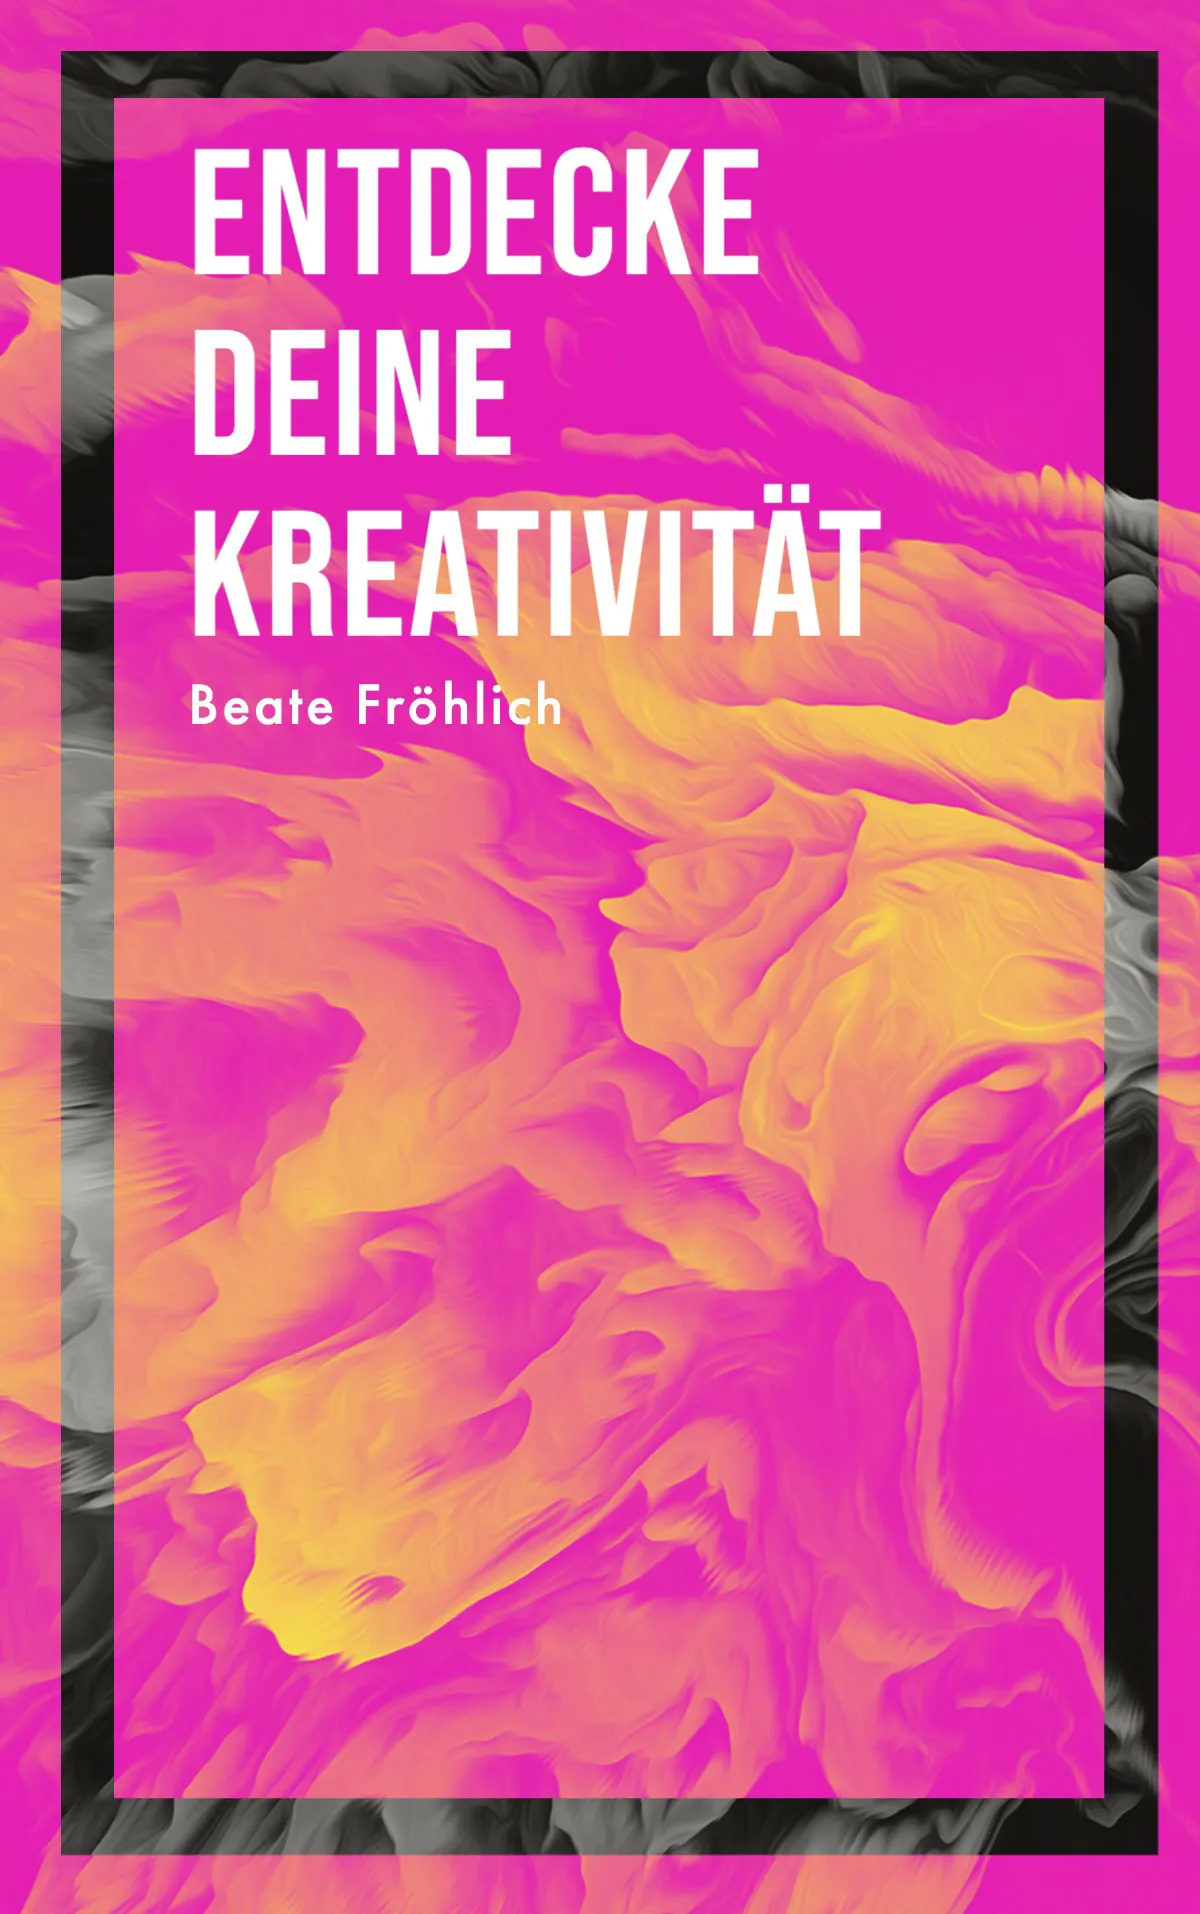 Pink and Yellow Duotone Liquid Creativity Book Cover